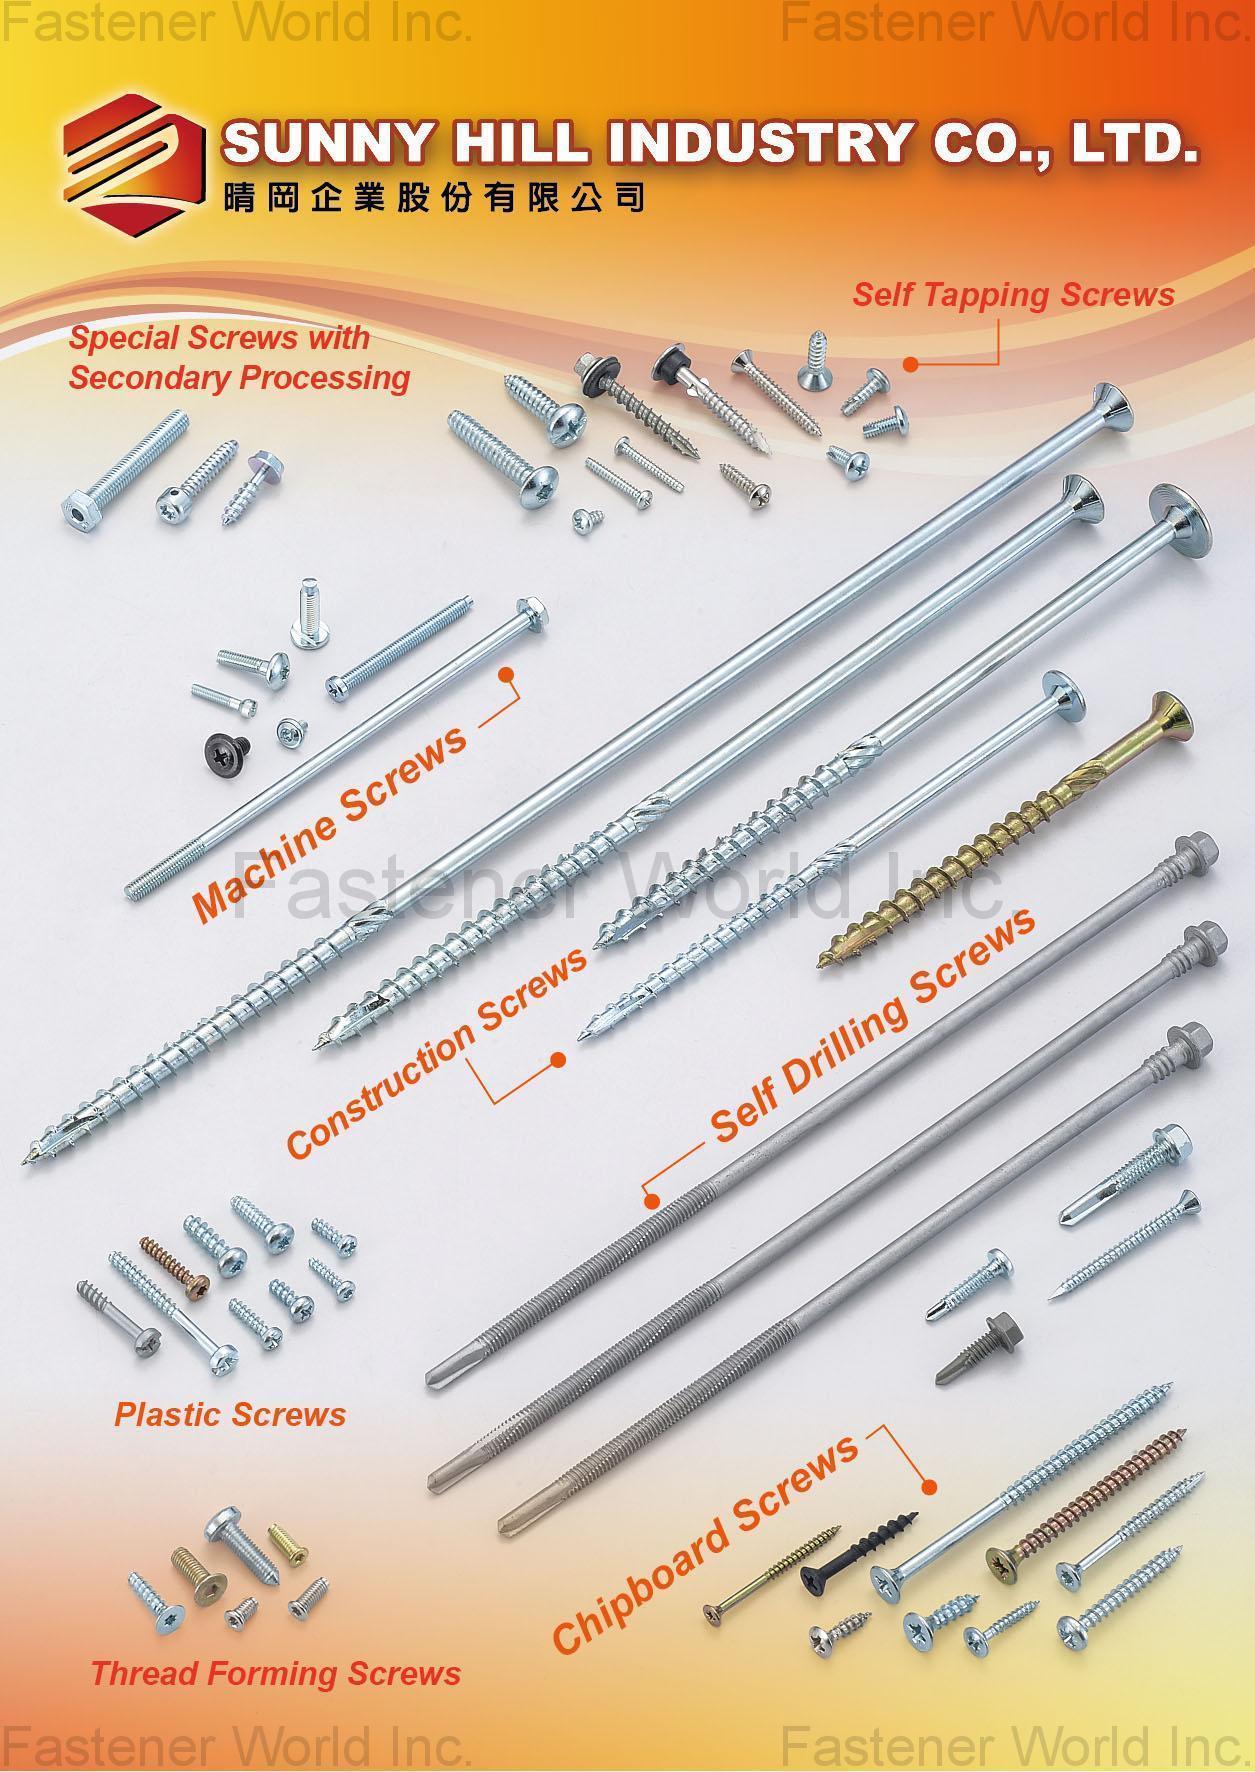 SUNNY HILL INDUSTRY CO., LTD. , Special Screws with Secondary Processing , Self Tapping Screws, Machine Screws, Construction Screws, Self Drilling Screws, Plastic Screws, Thread Forming Screws, Chipboard Screws